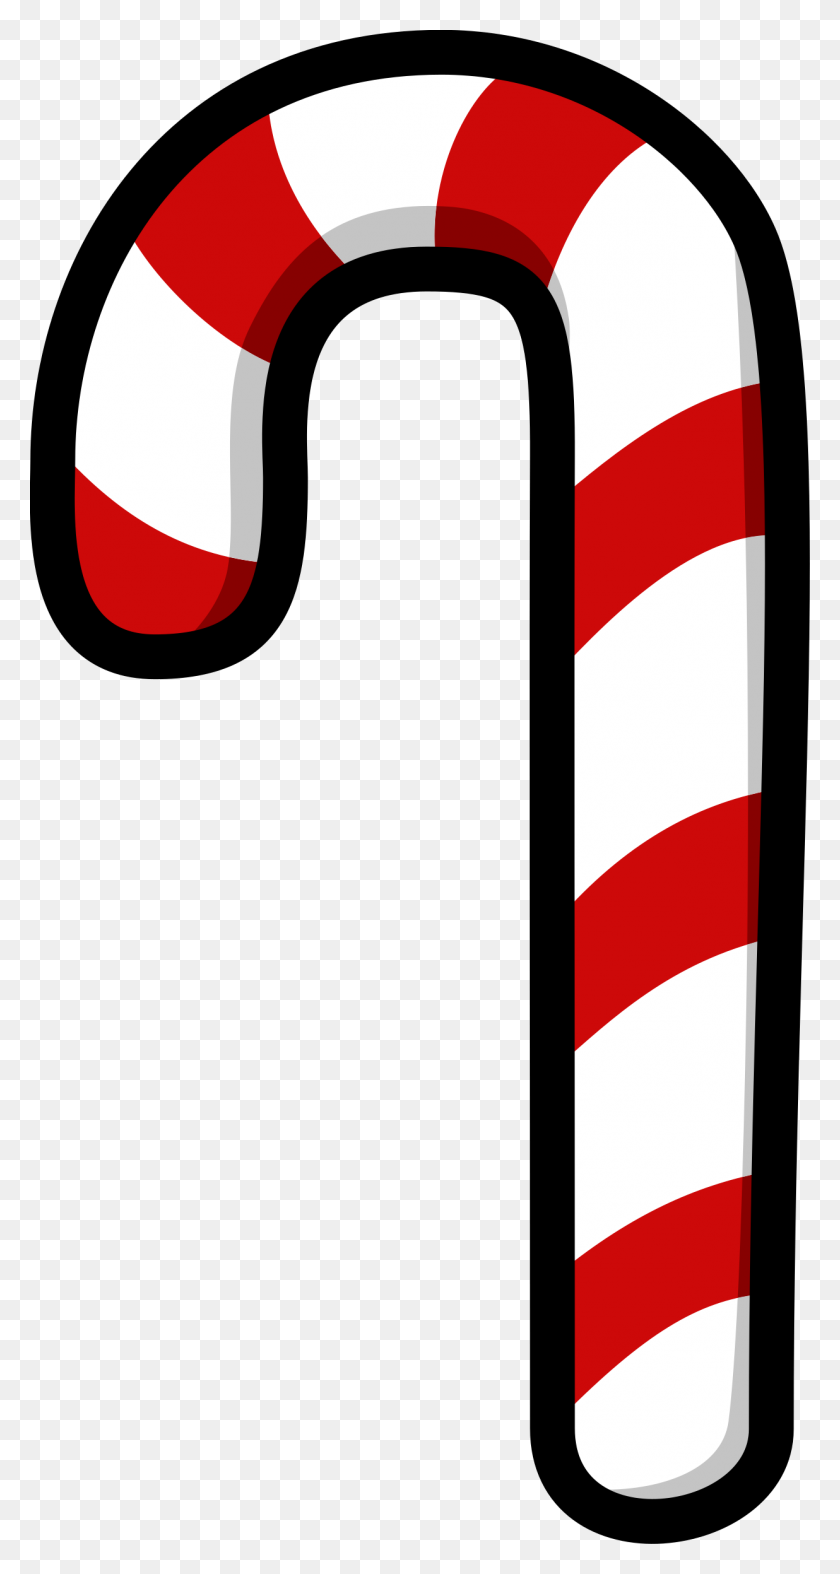 1236x2400 Free Candy Cane Clipart Look At Candy Cane Clip Art Images - Candy Cane Clipart Free